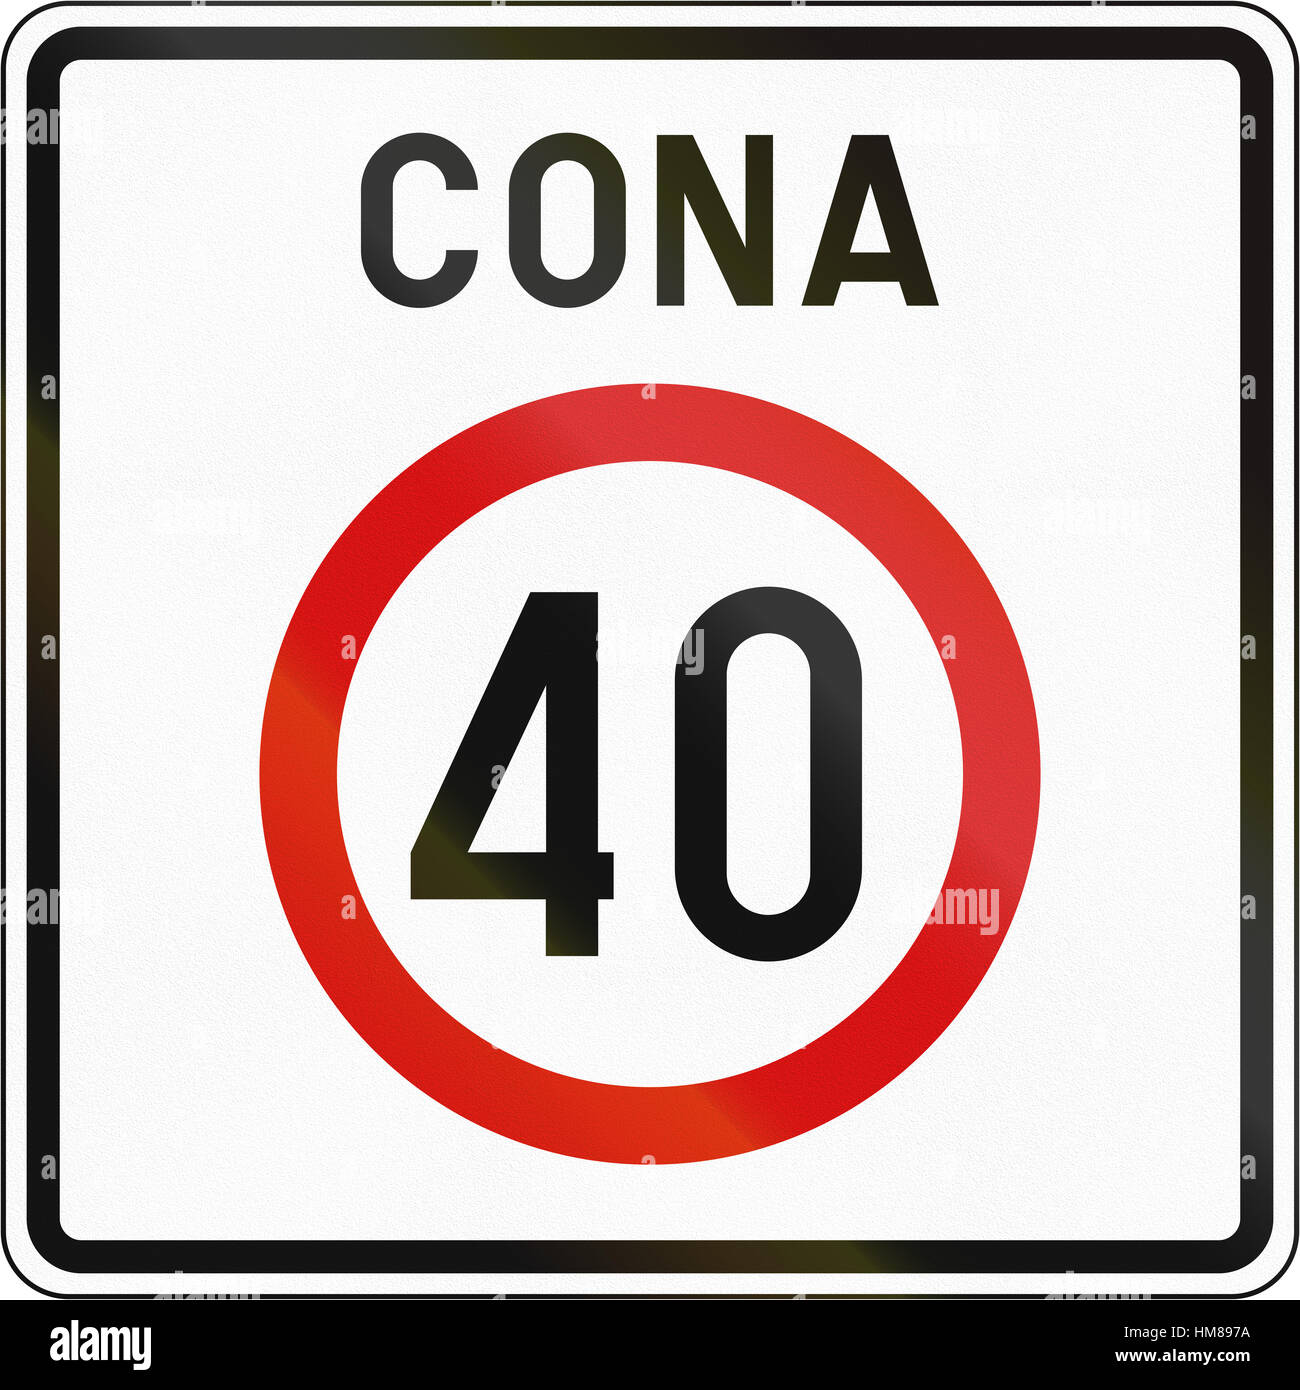 Slovenian road sign - Speed limit zone. Cona means zone. Stock Photo